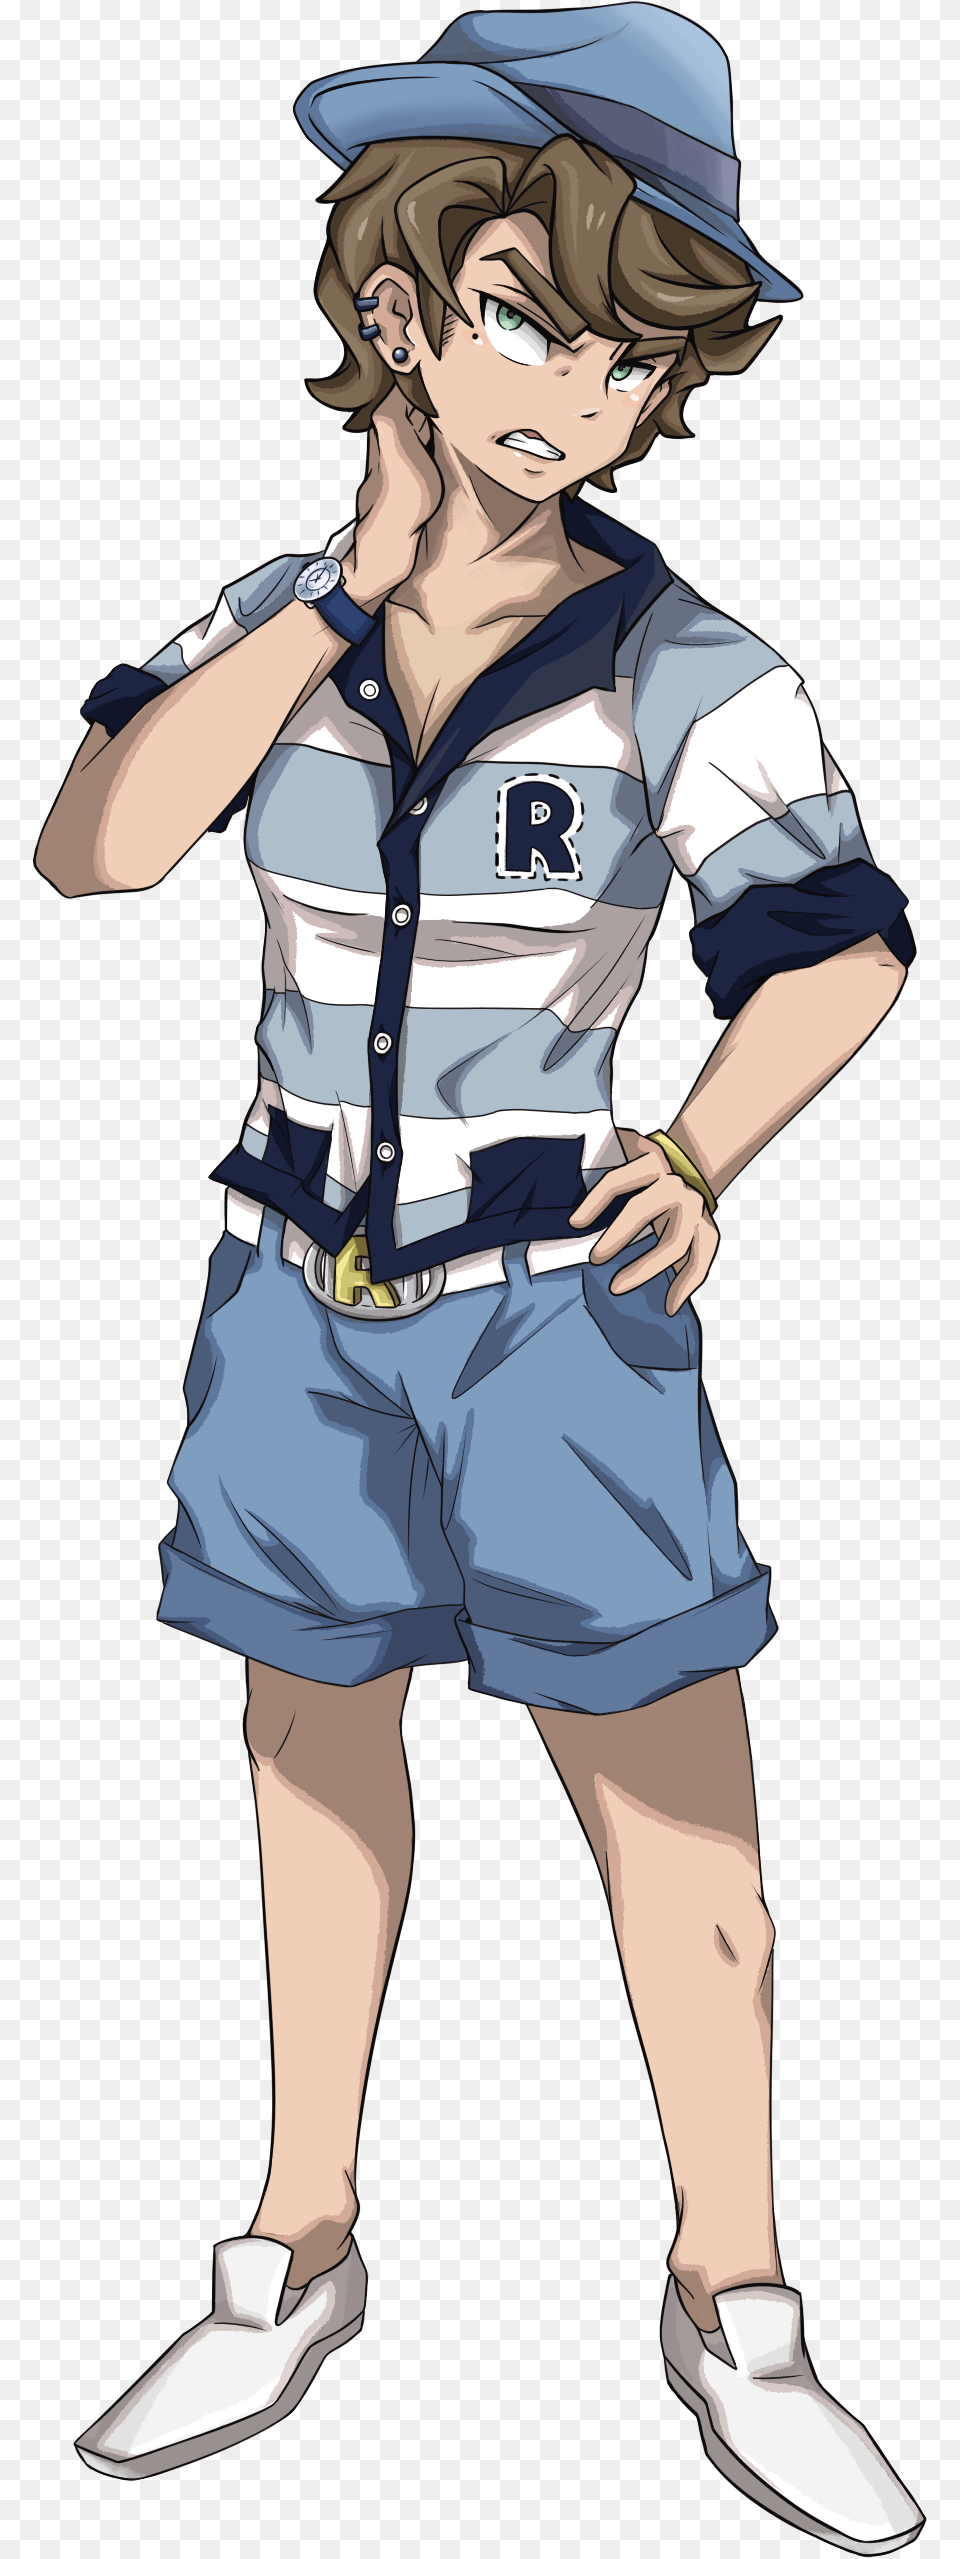 Marco Pokemon Trainer Bases Free, Book, Clothing, Comics, Shorts Png